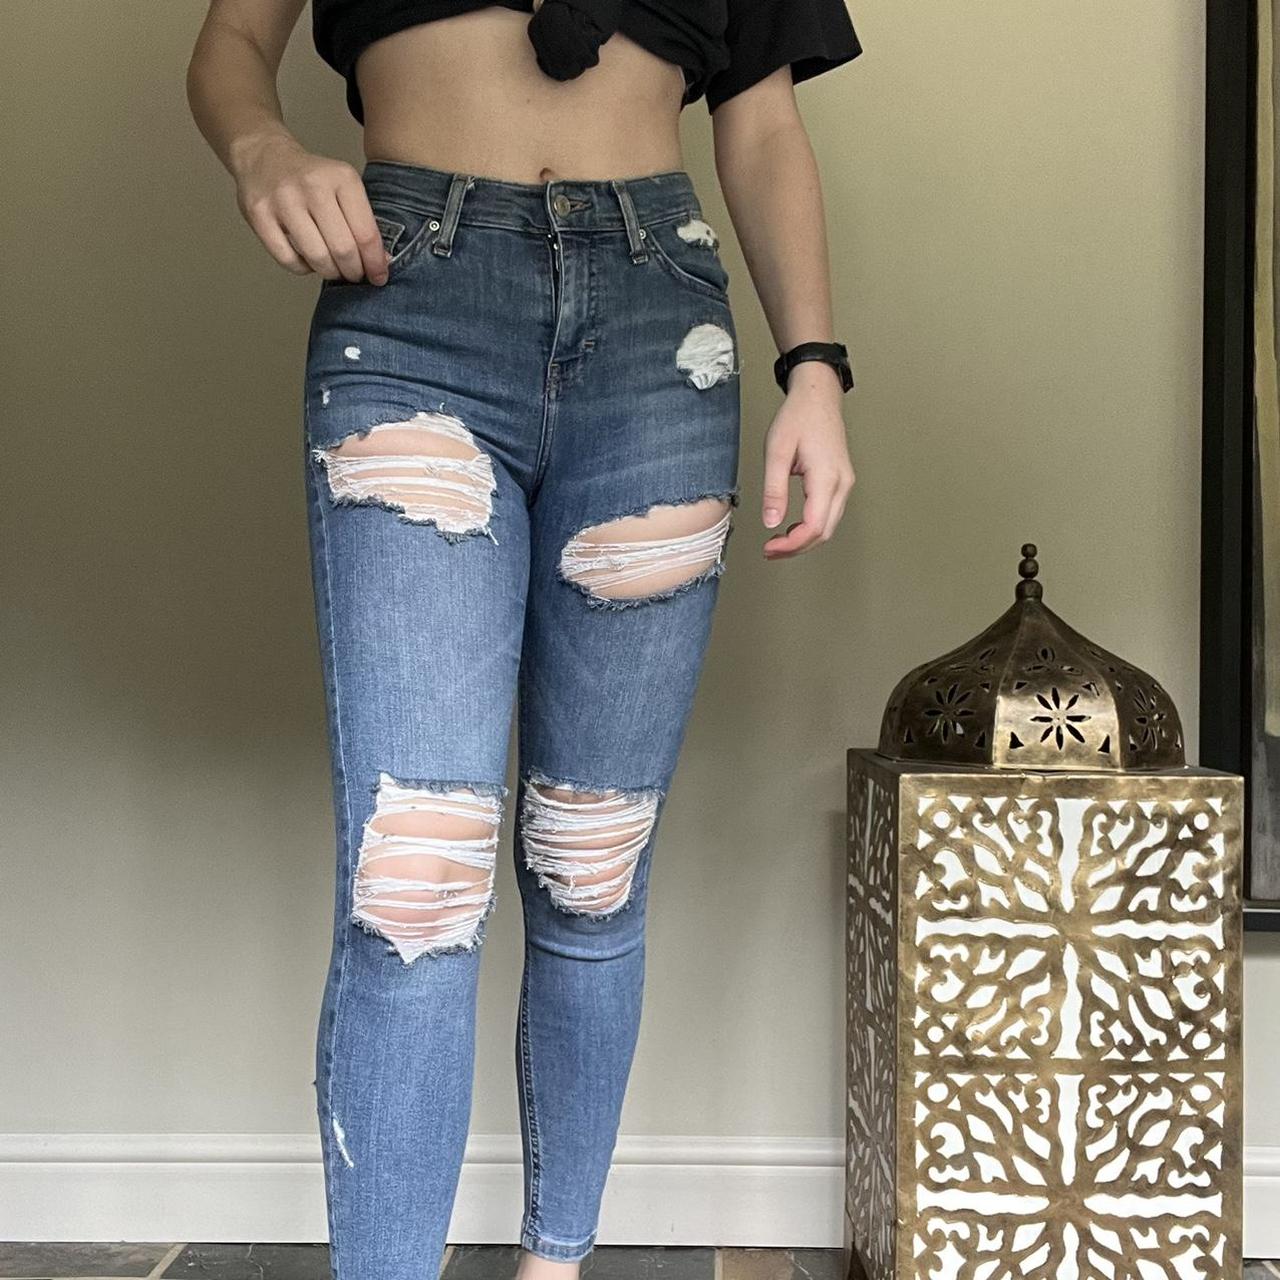 Sexy girl wearing skintight Levis jeans